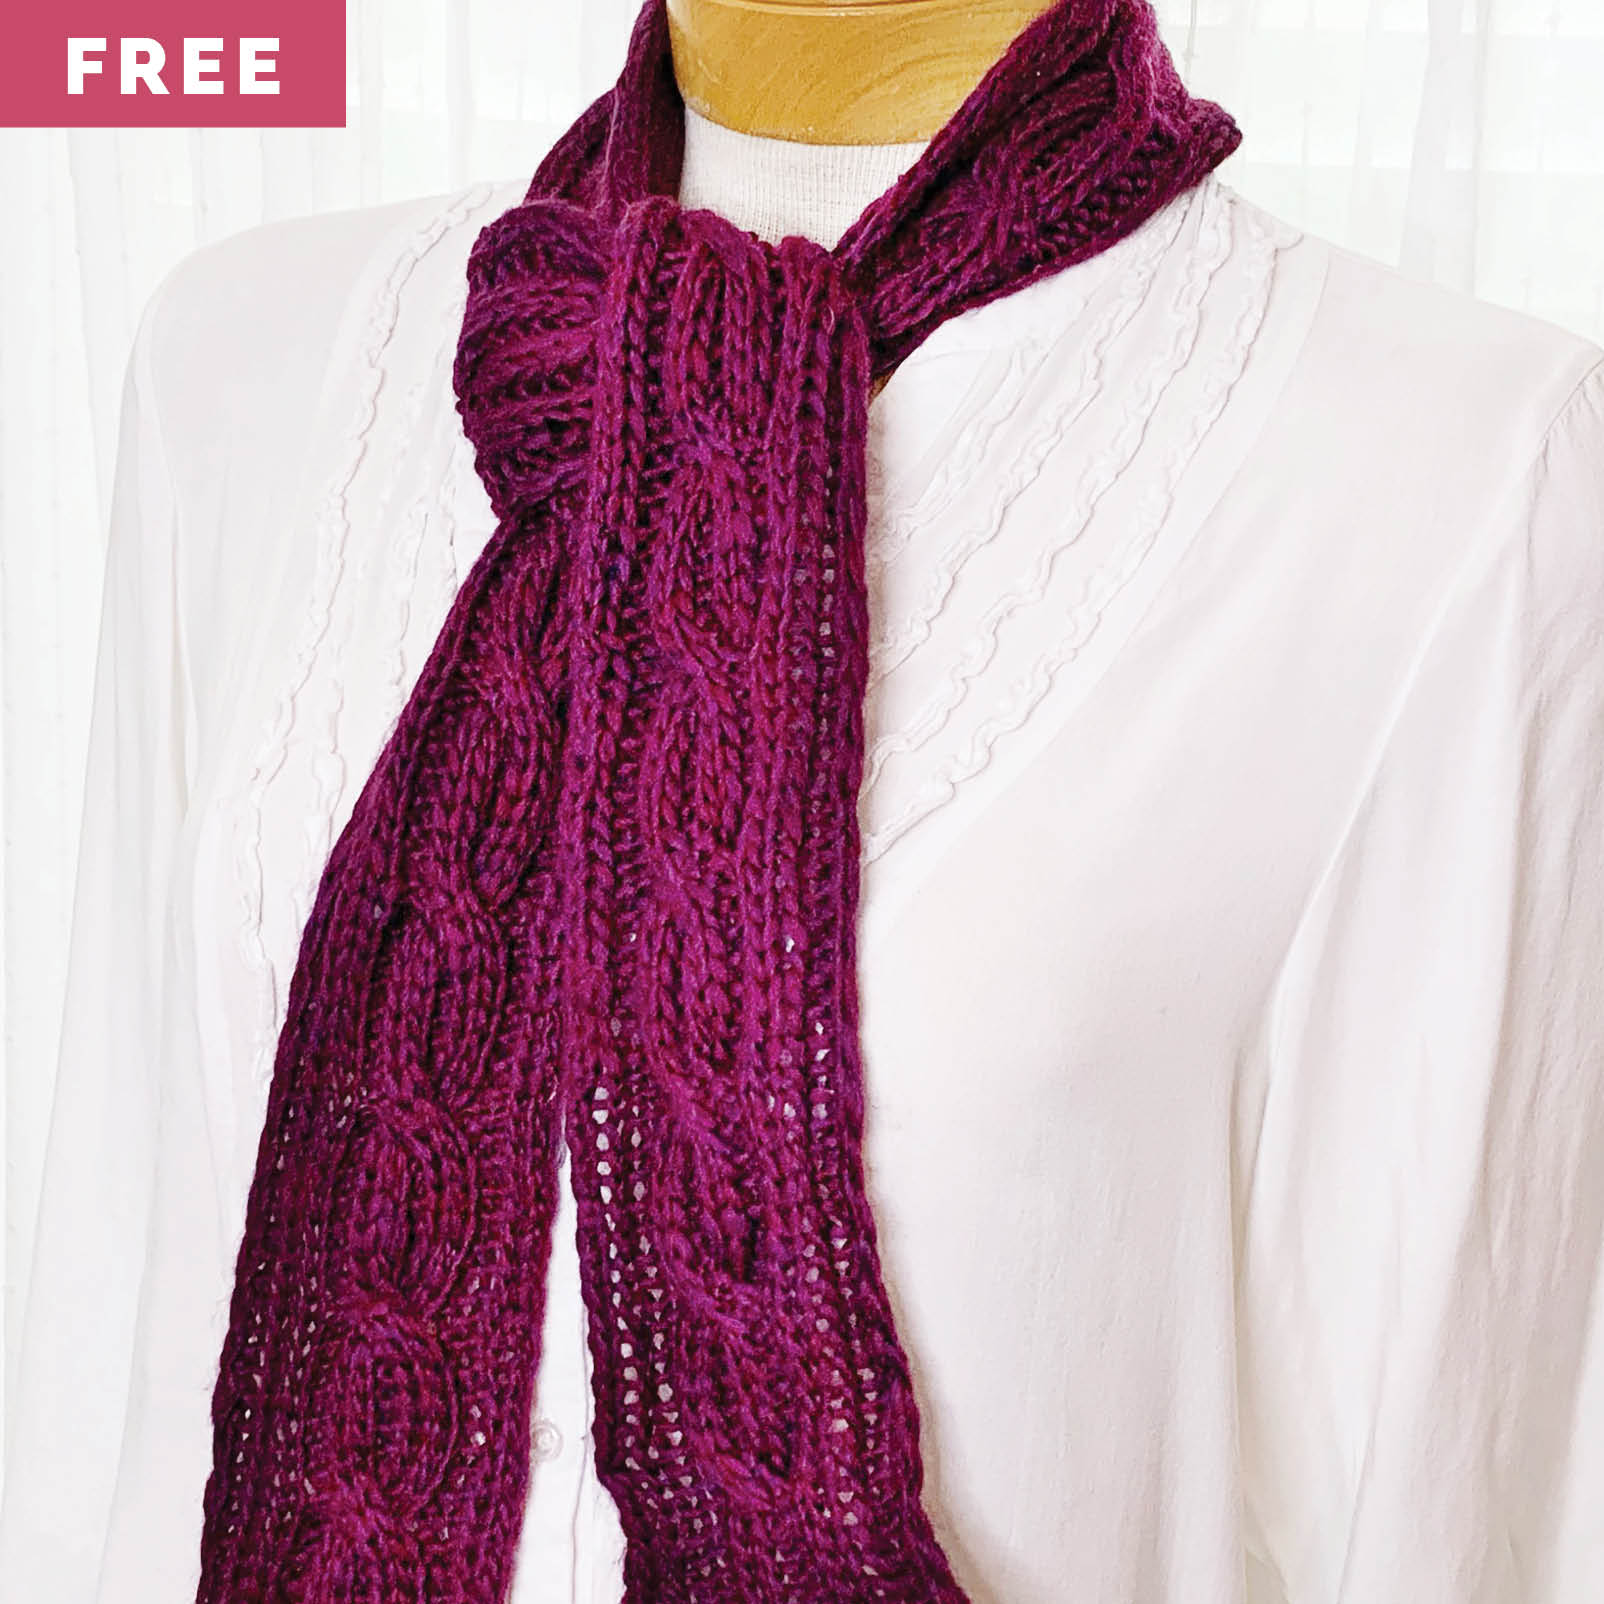 Free Knitting Pattern - Skinny Reversible Cable Scarf